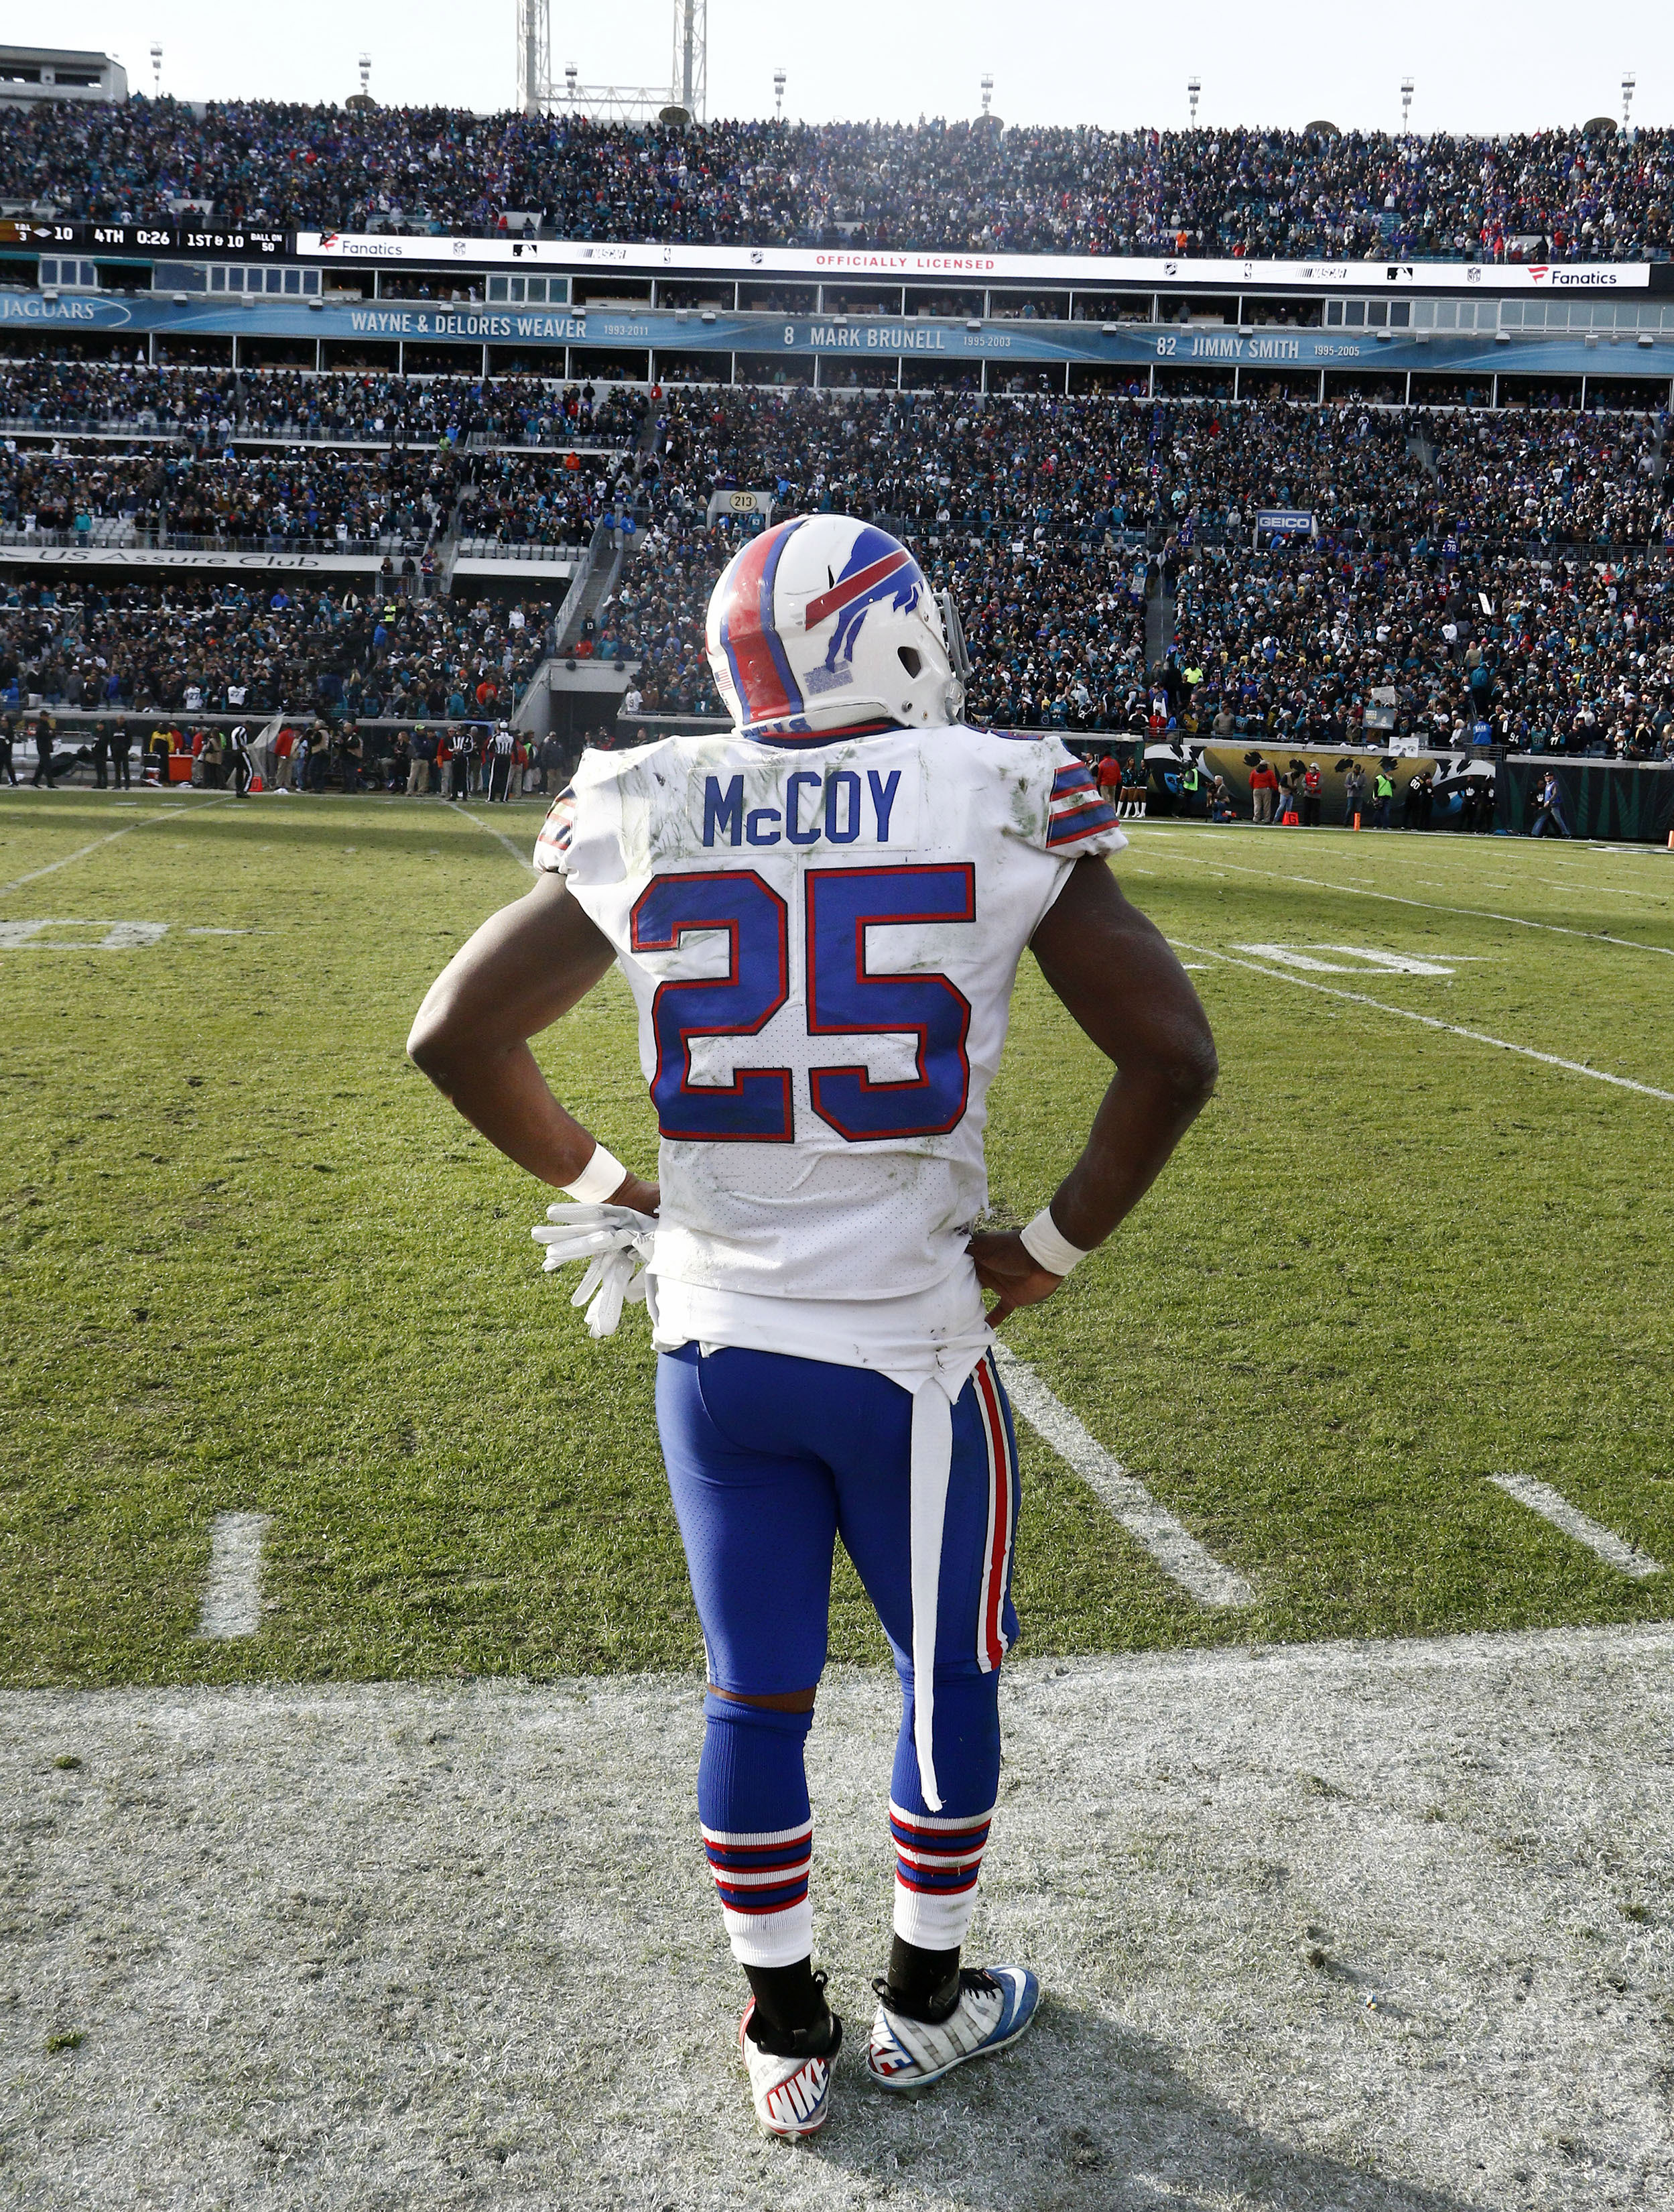 A Look Back at LeSean McCoy’s Off-Field Issues